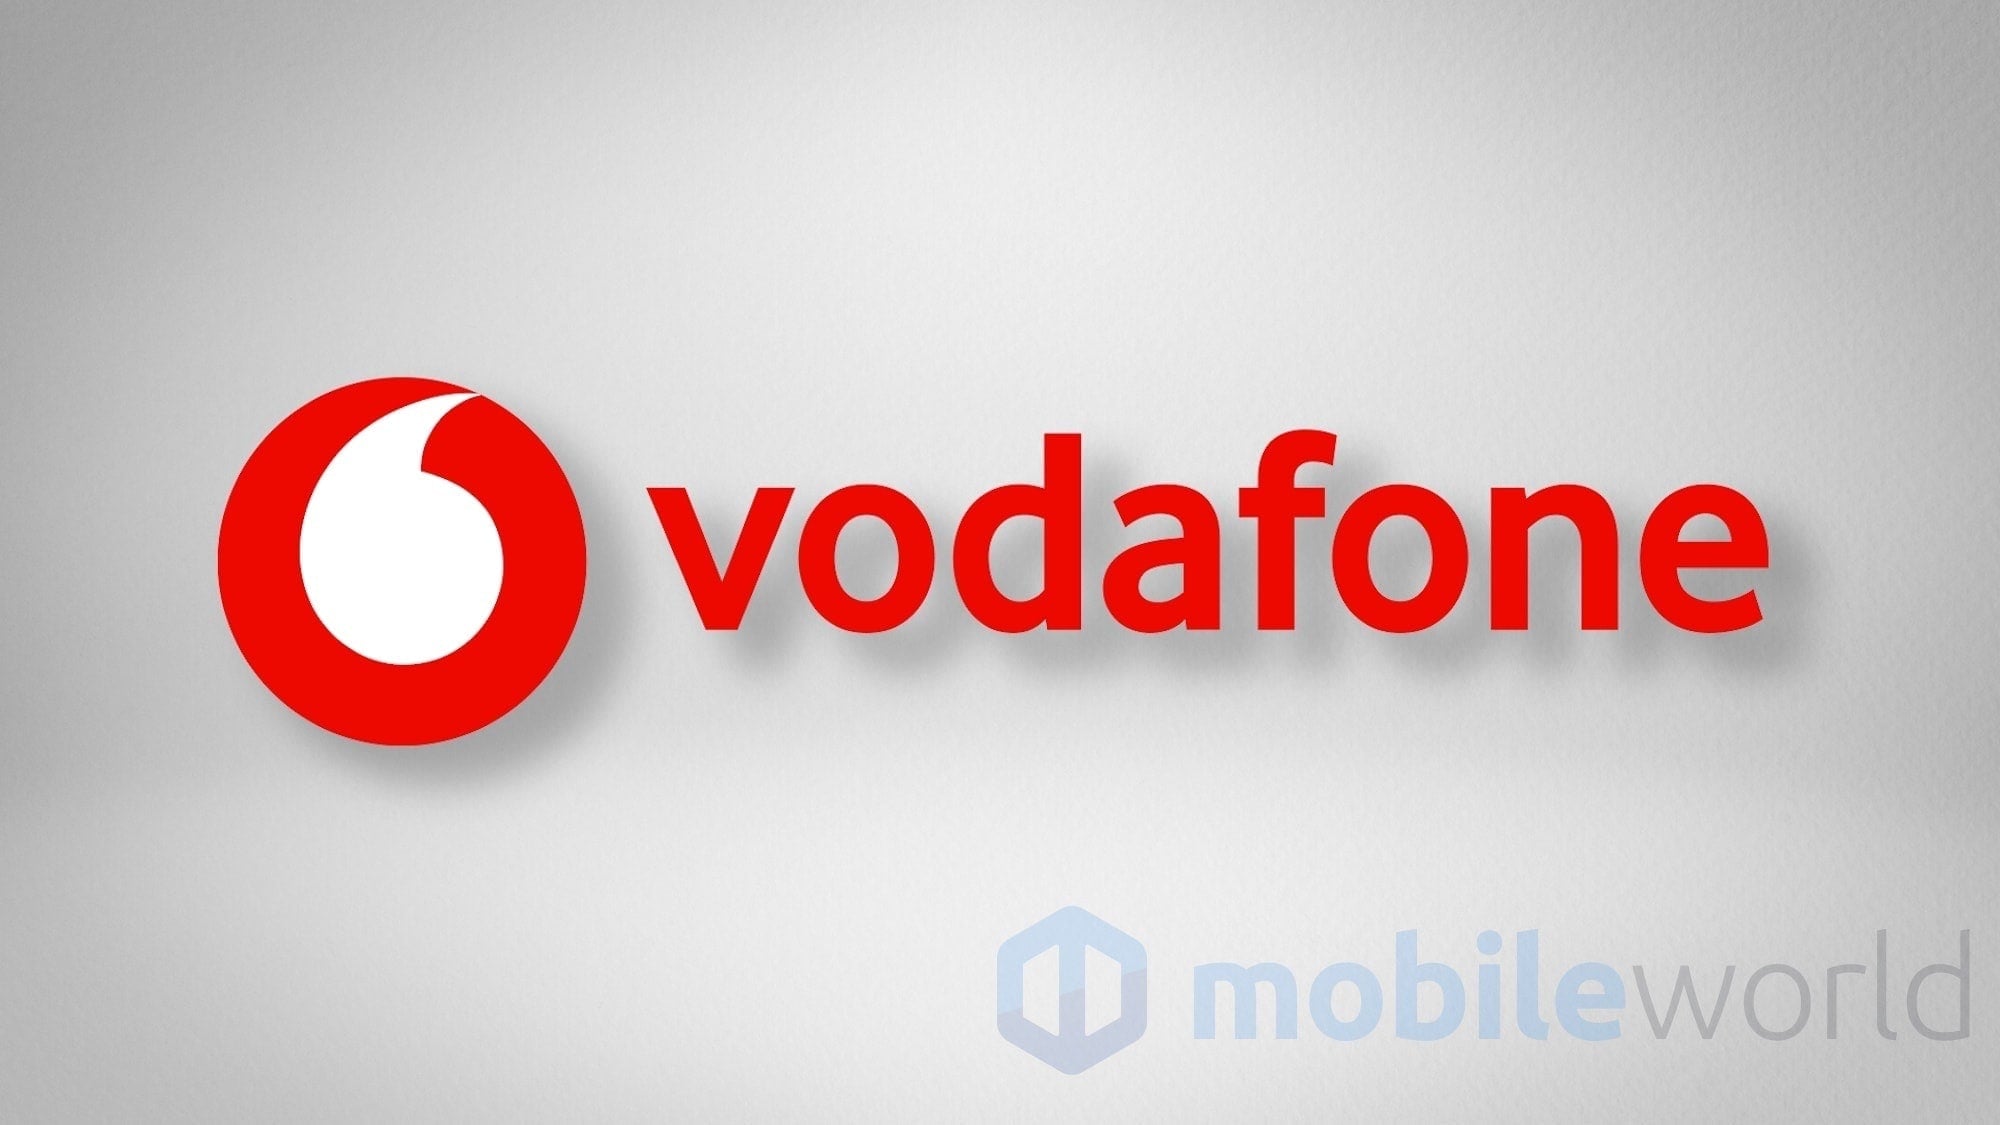 Vodafone eSIM is now available: how to activate it, how it works and key questions